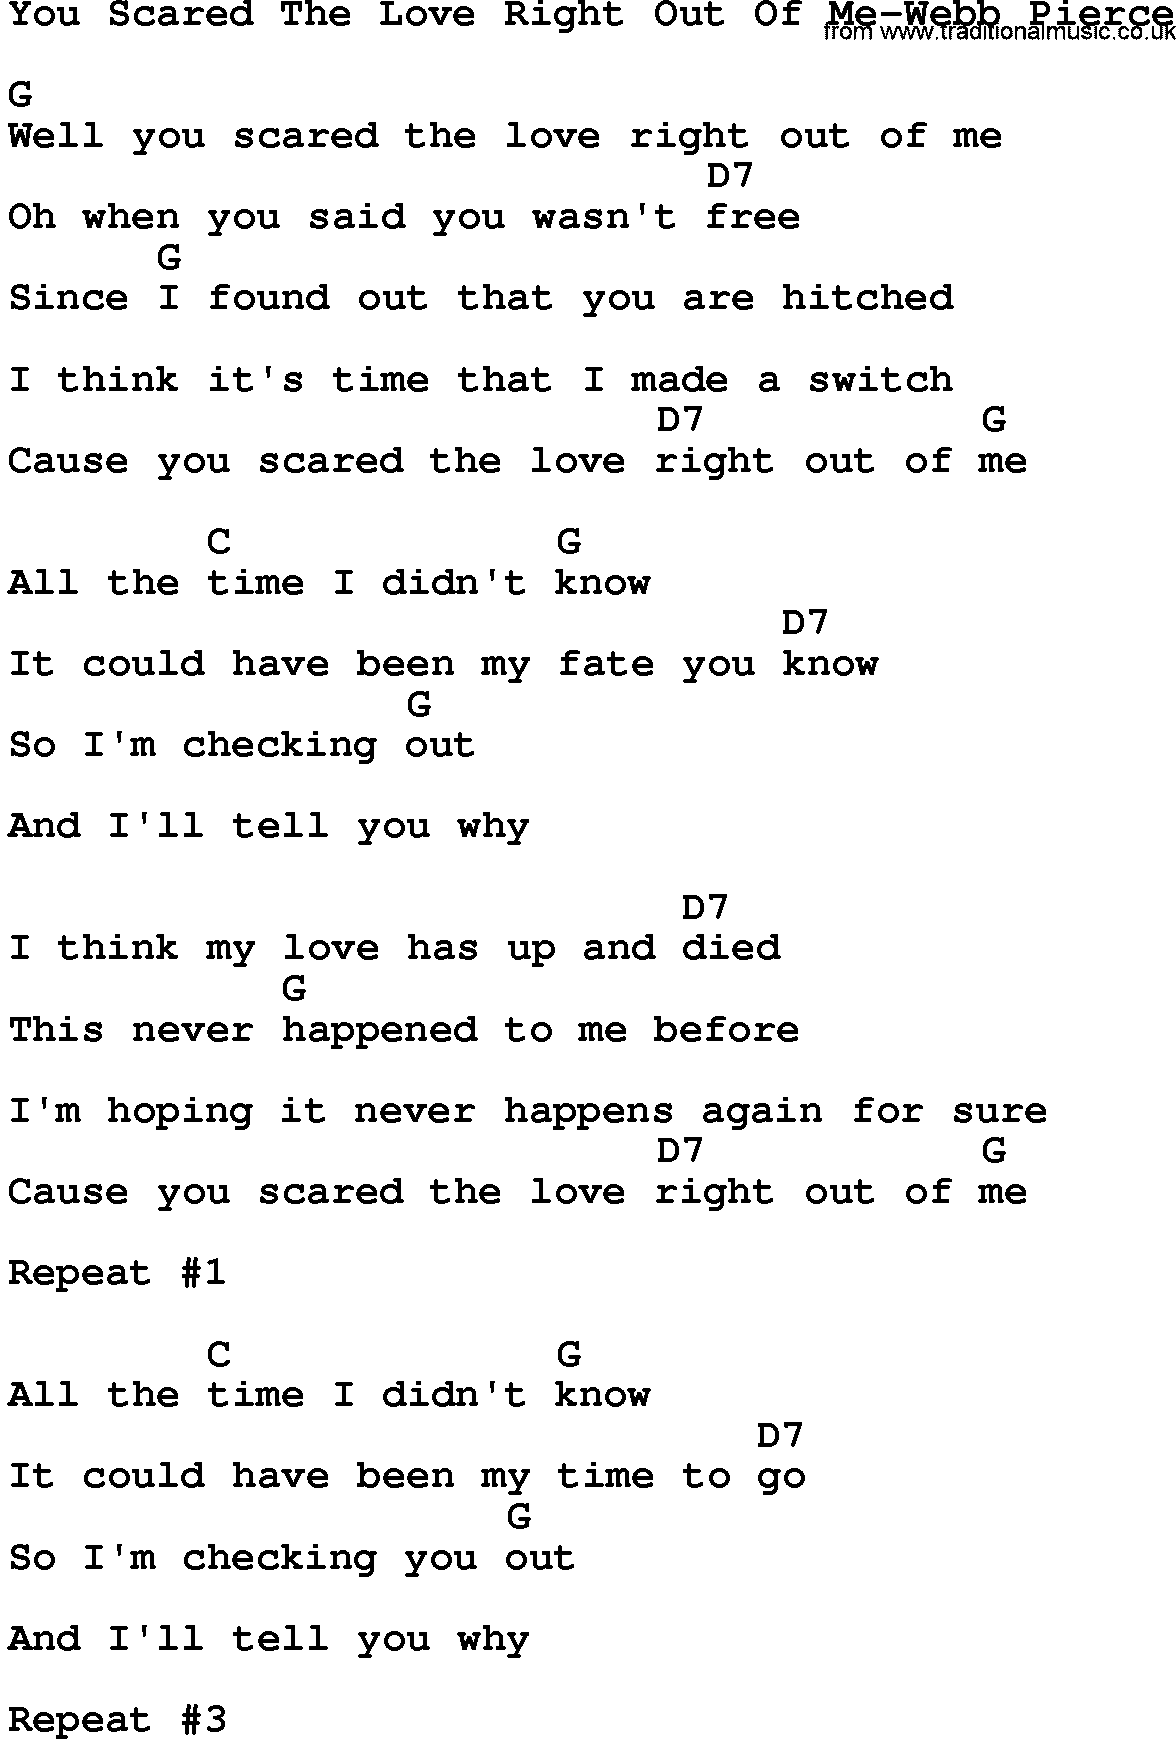 Country music song: You Scared The Love Right Out Of Me-Webb Pierce lyrics and chords